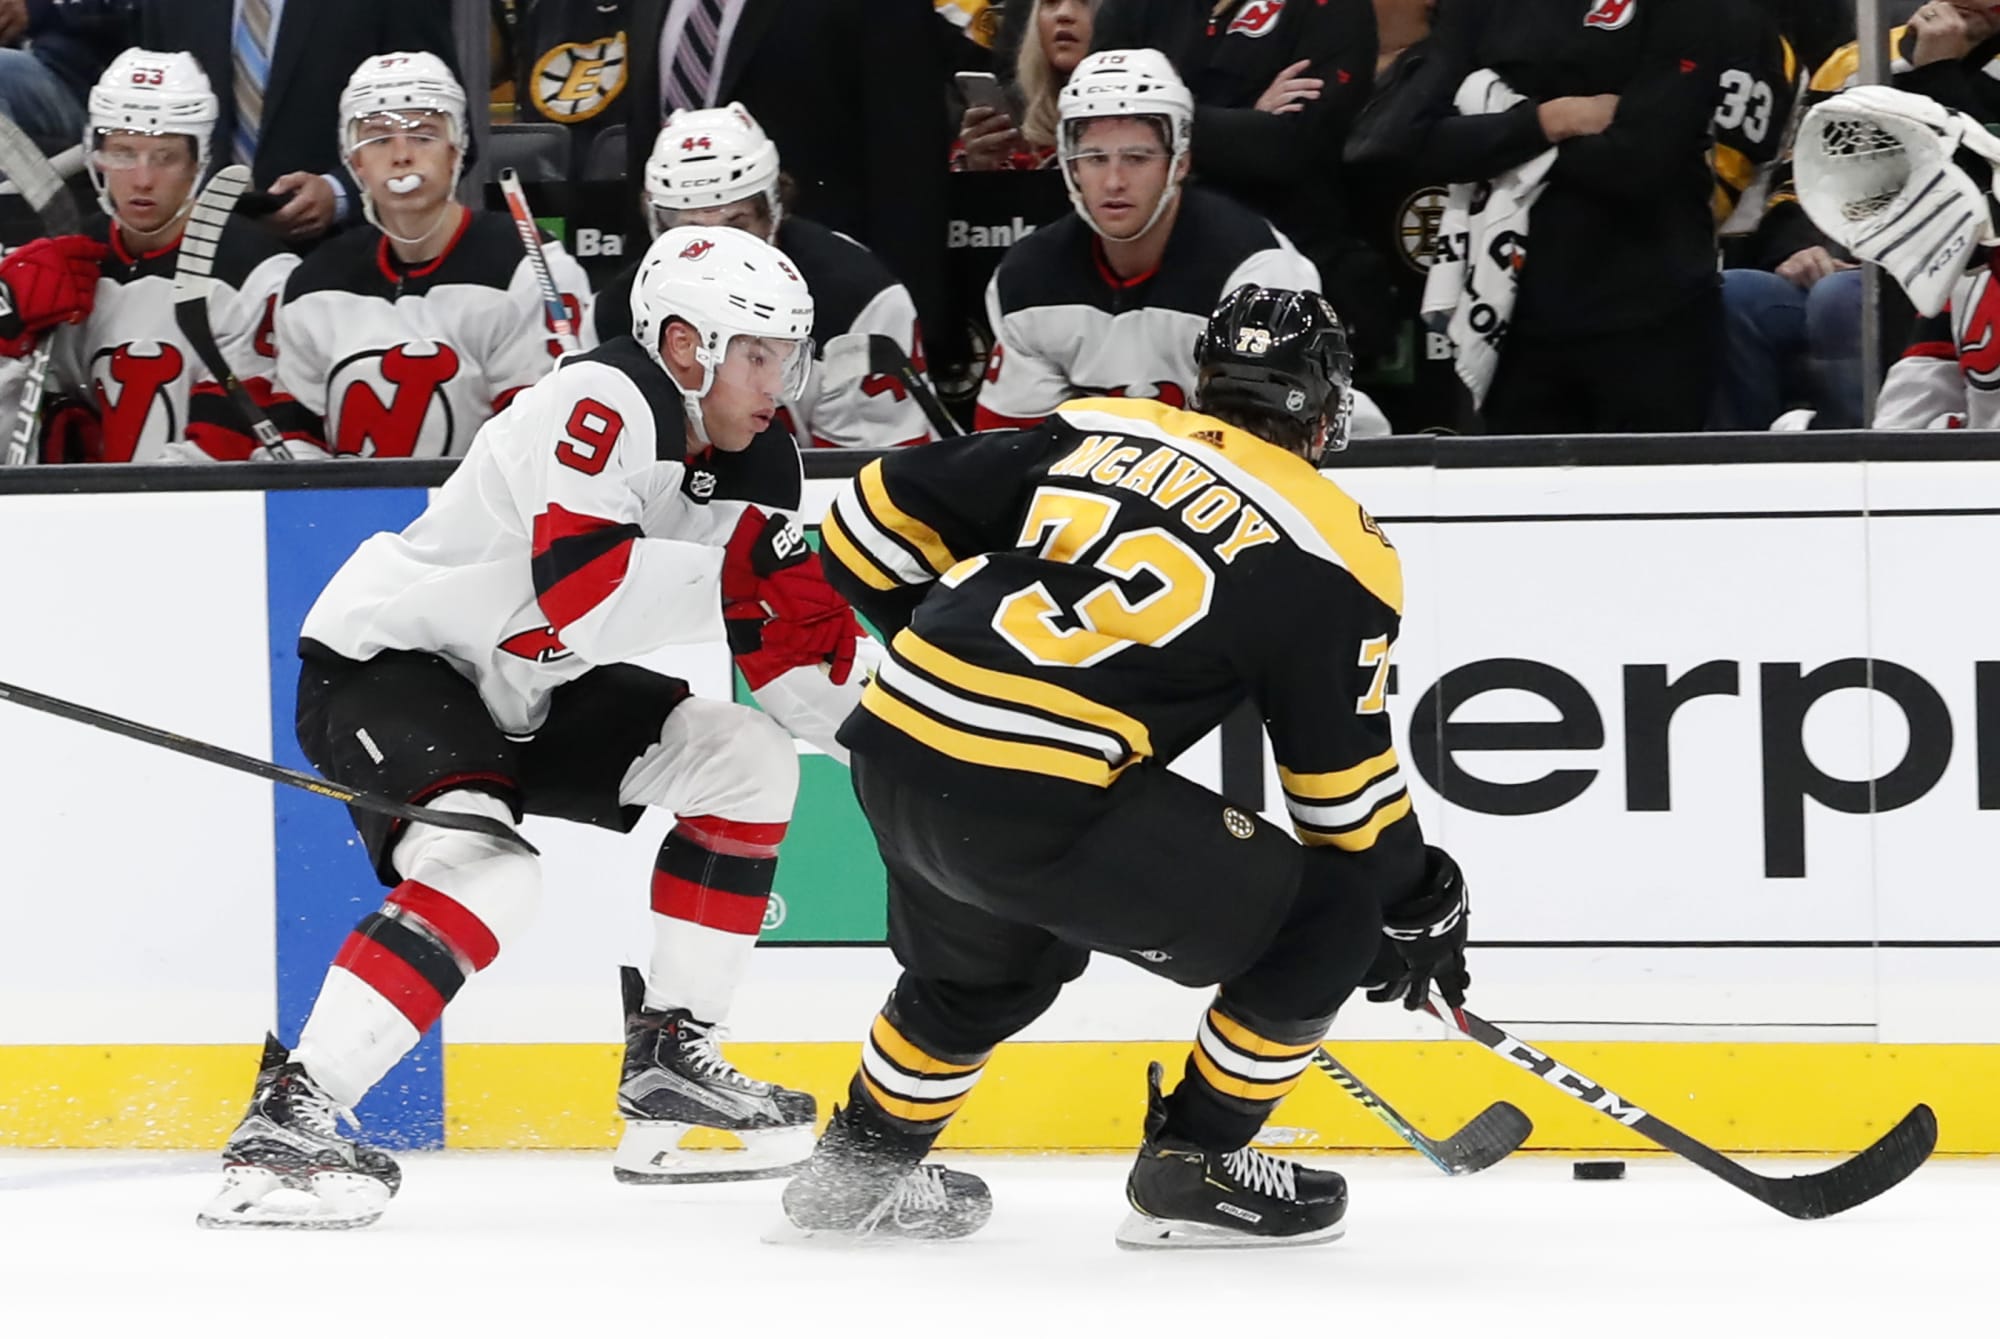 Boston Bruins: Why Taylor Hall is unlikely to end up in Bruins colors